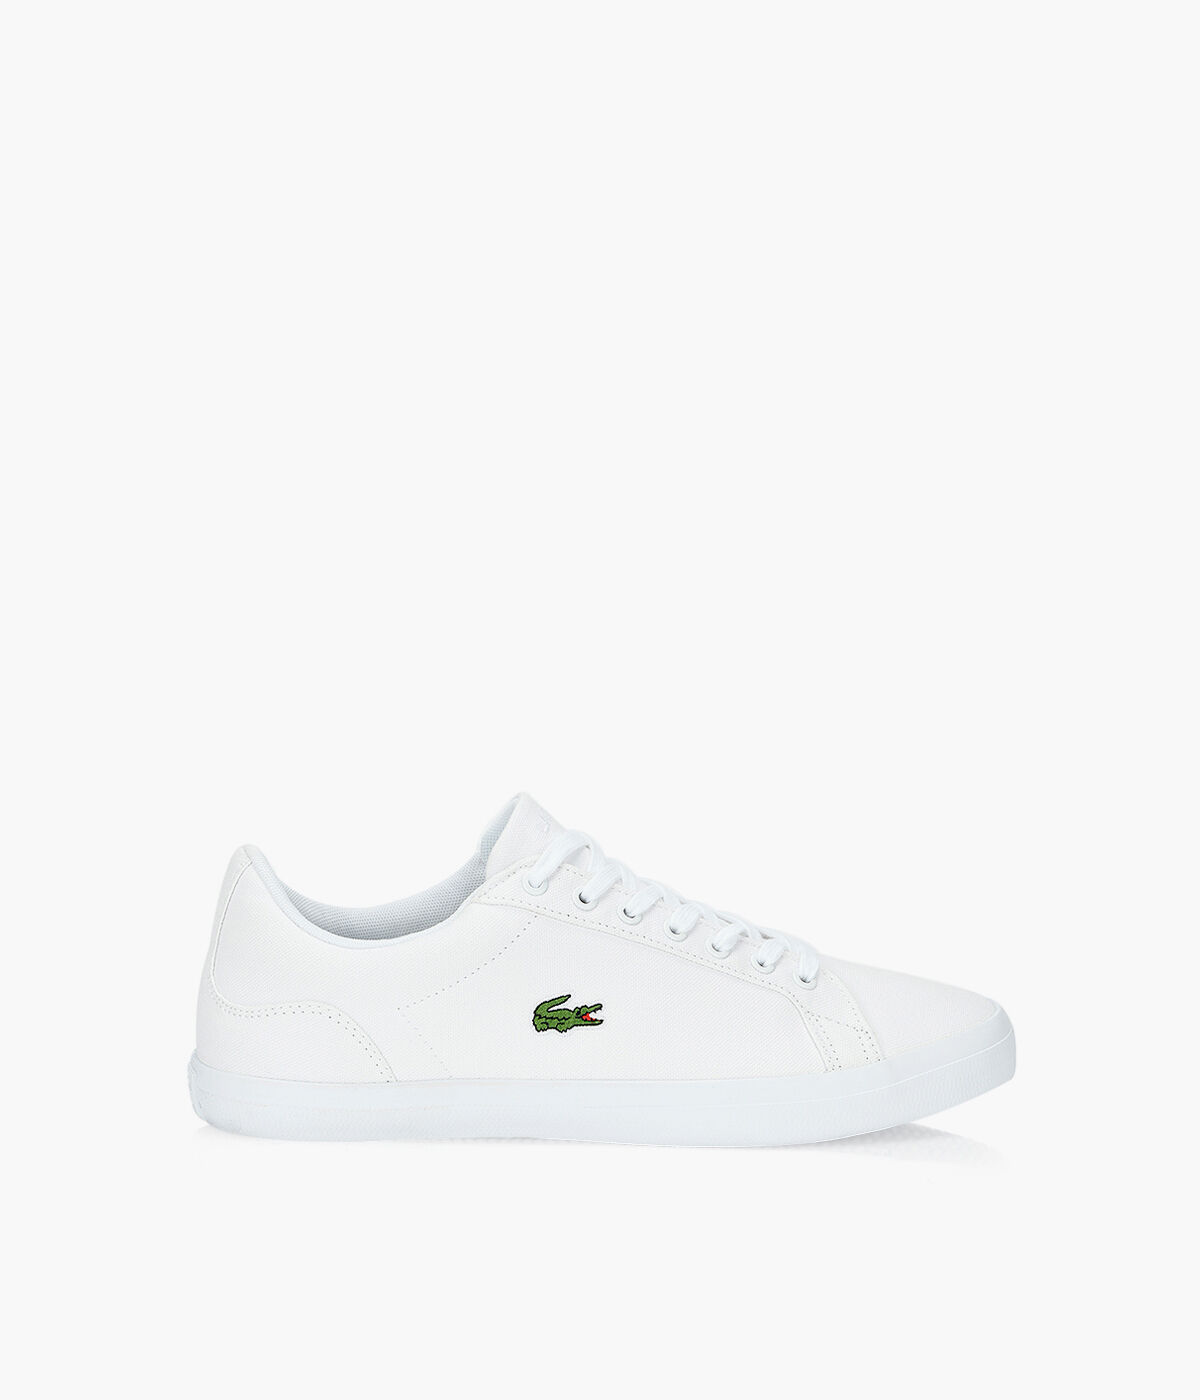 LACOSTE LEROND BL2 - Fabric | Browns Shoes